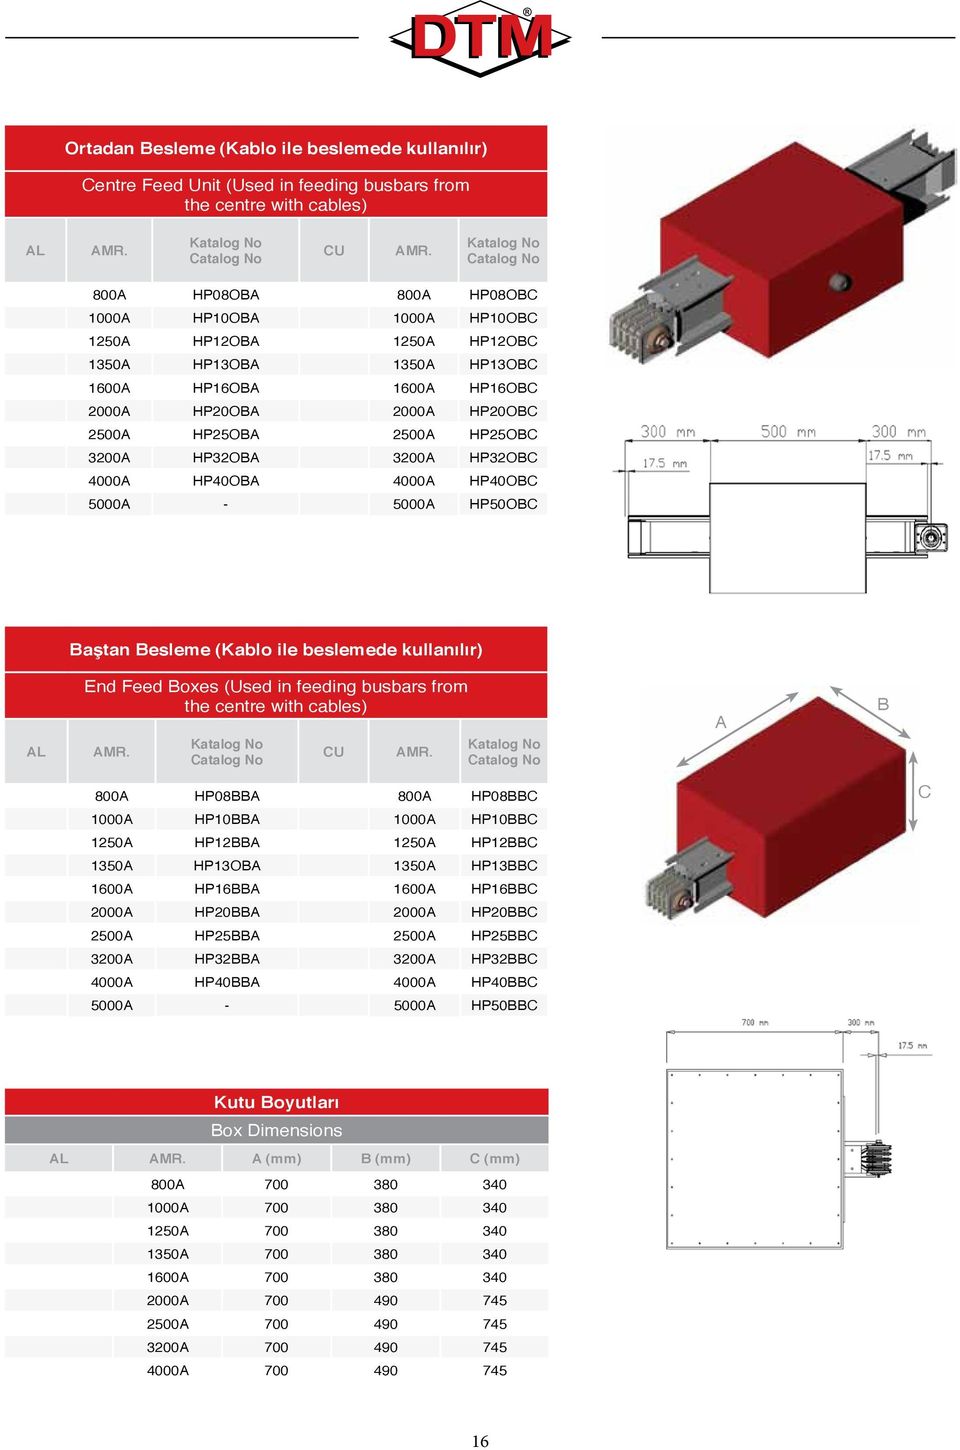 Baştan Besleme (Kablo ile beslemede kullanılır) AL End Feed Boxes (Used in feeding busbars from the centre with cables) CU A B 800A HP08BBA 800A HP08BBC 1000A HP10BBA 1000A HP10BBC 1250A HP12BBA